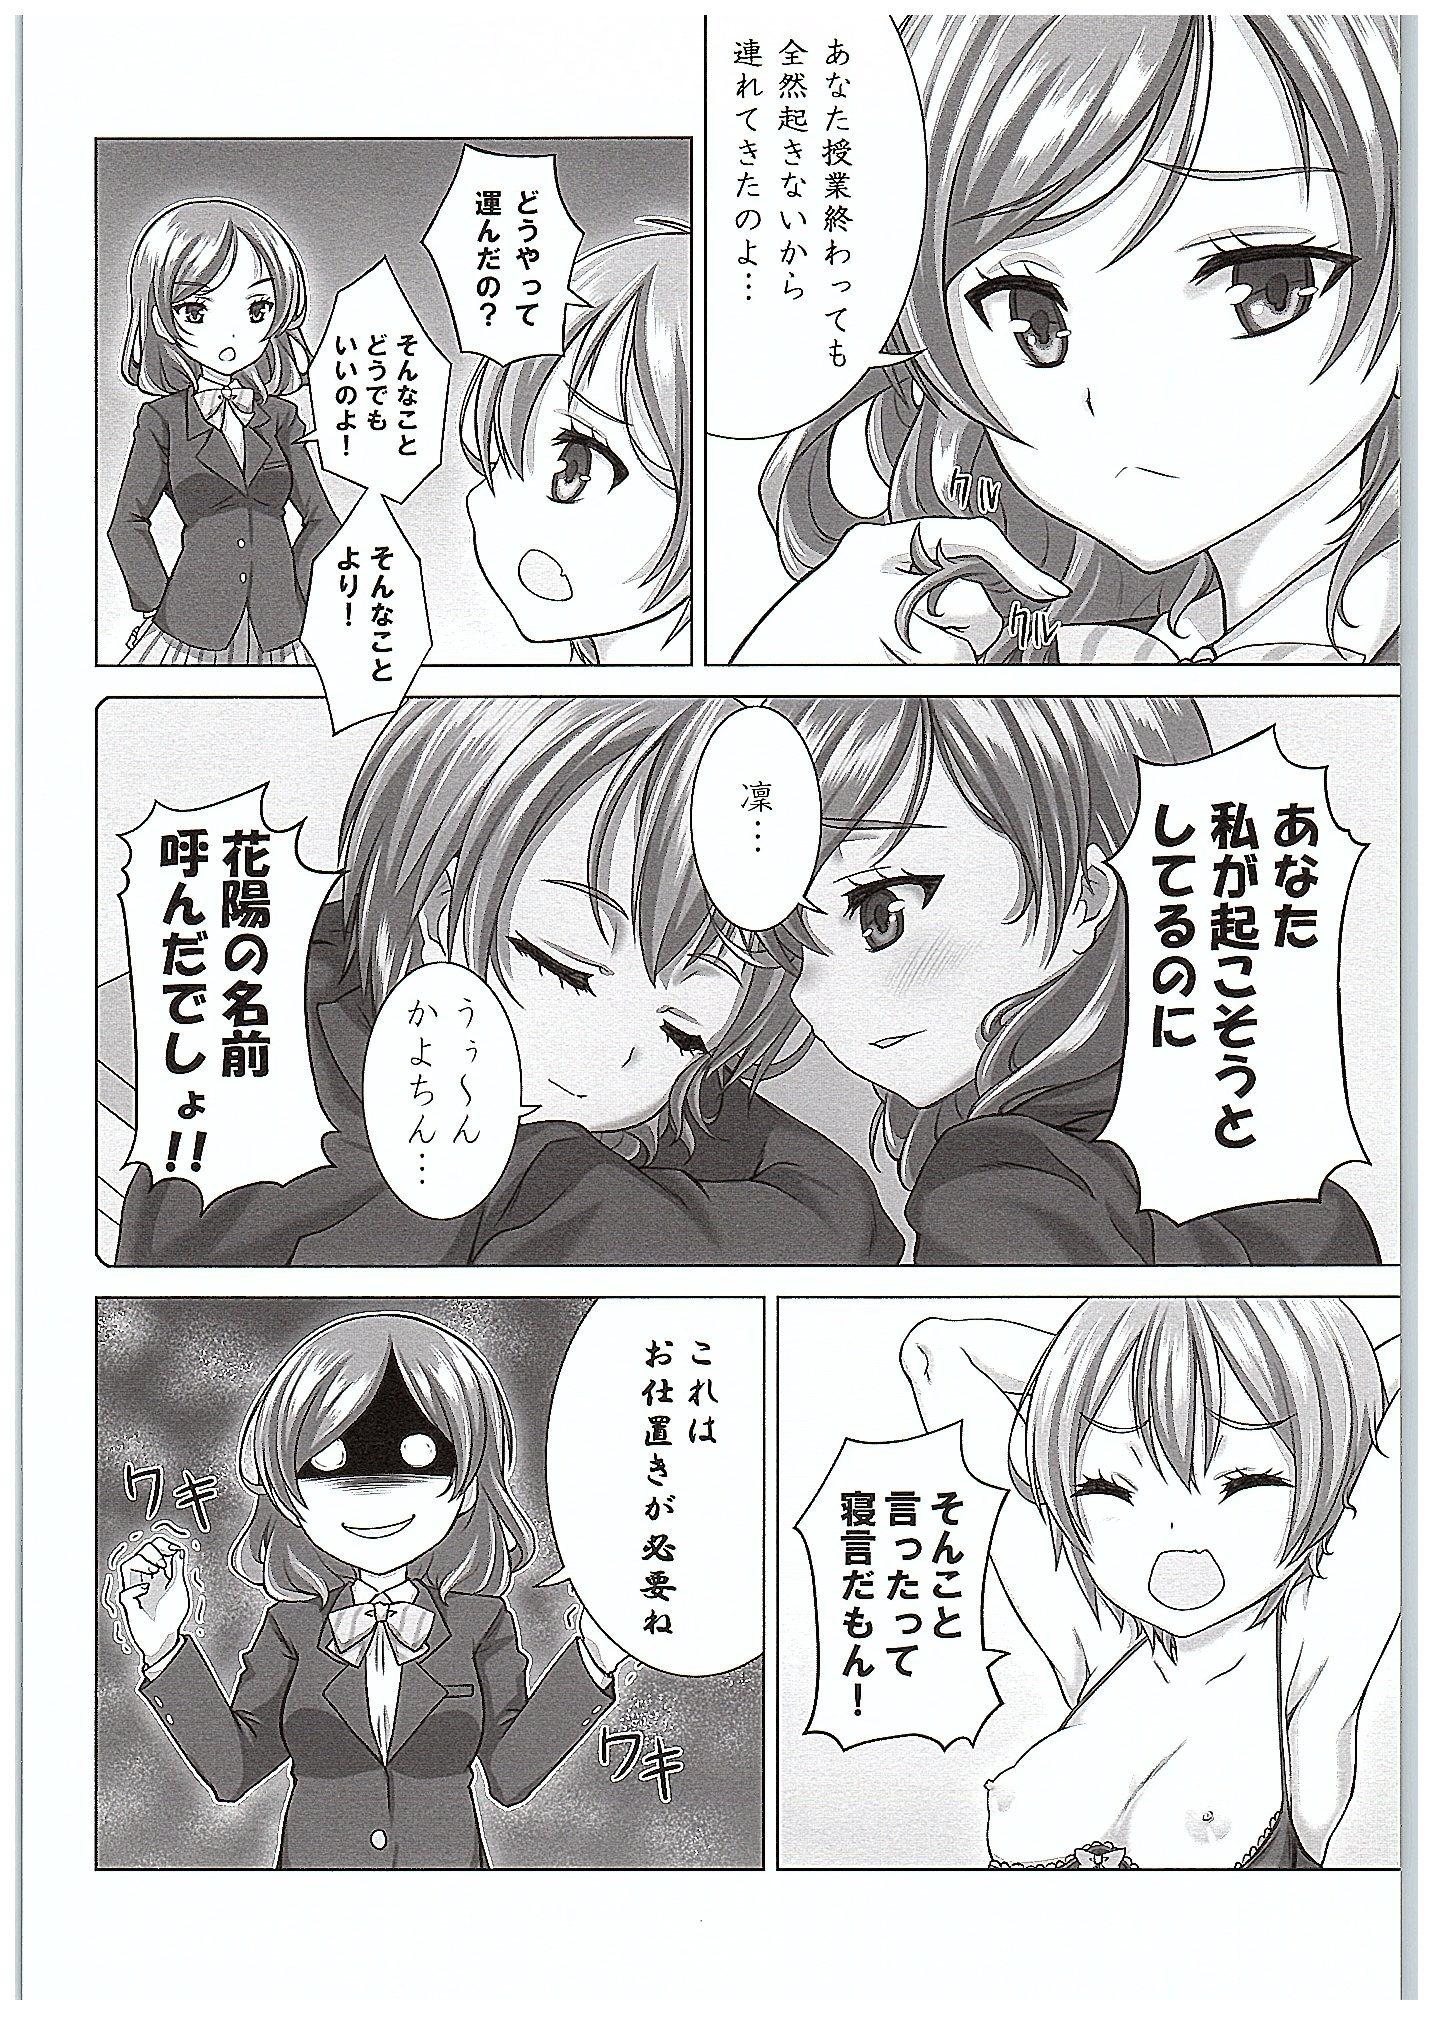 Animated Rin-chan de Asobou! - Love live Calle - Page 5